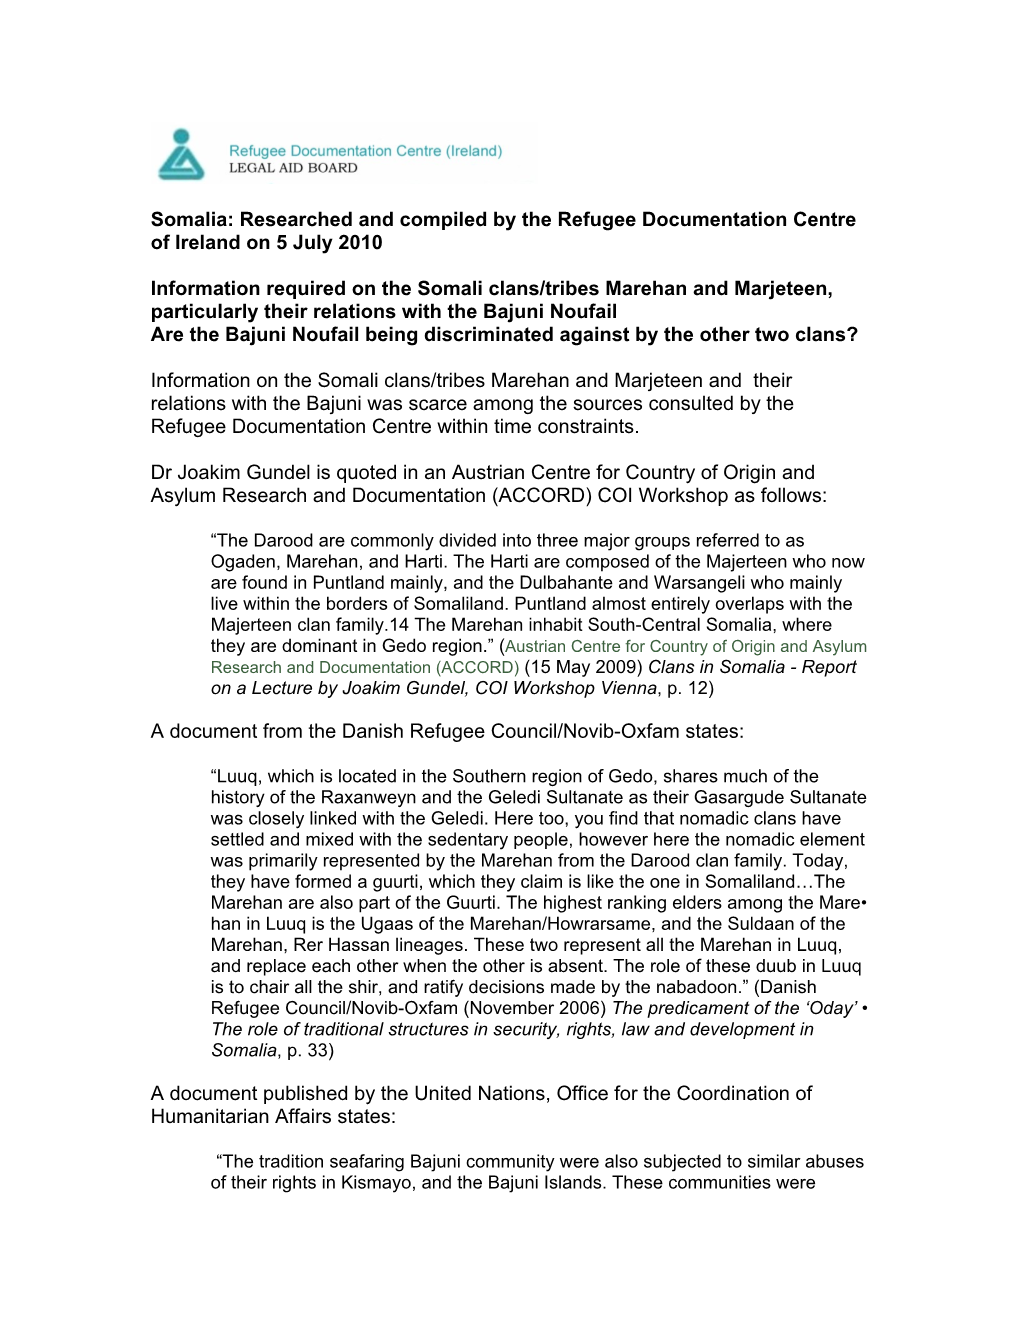 Somalia: Researched and Compiled by the Refugee Documentation Centre of Ireland on 5 July 2010